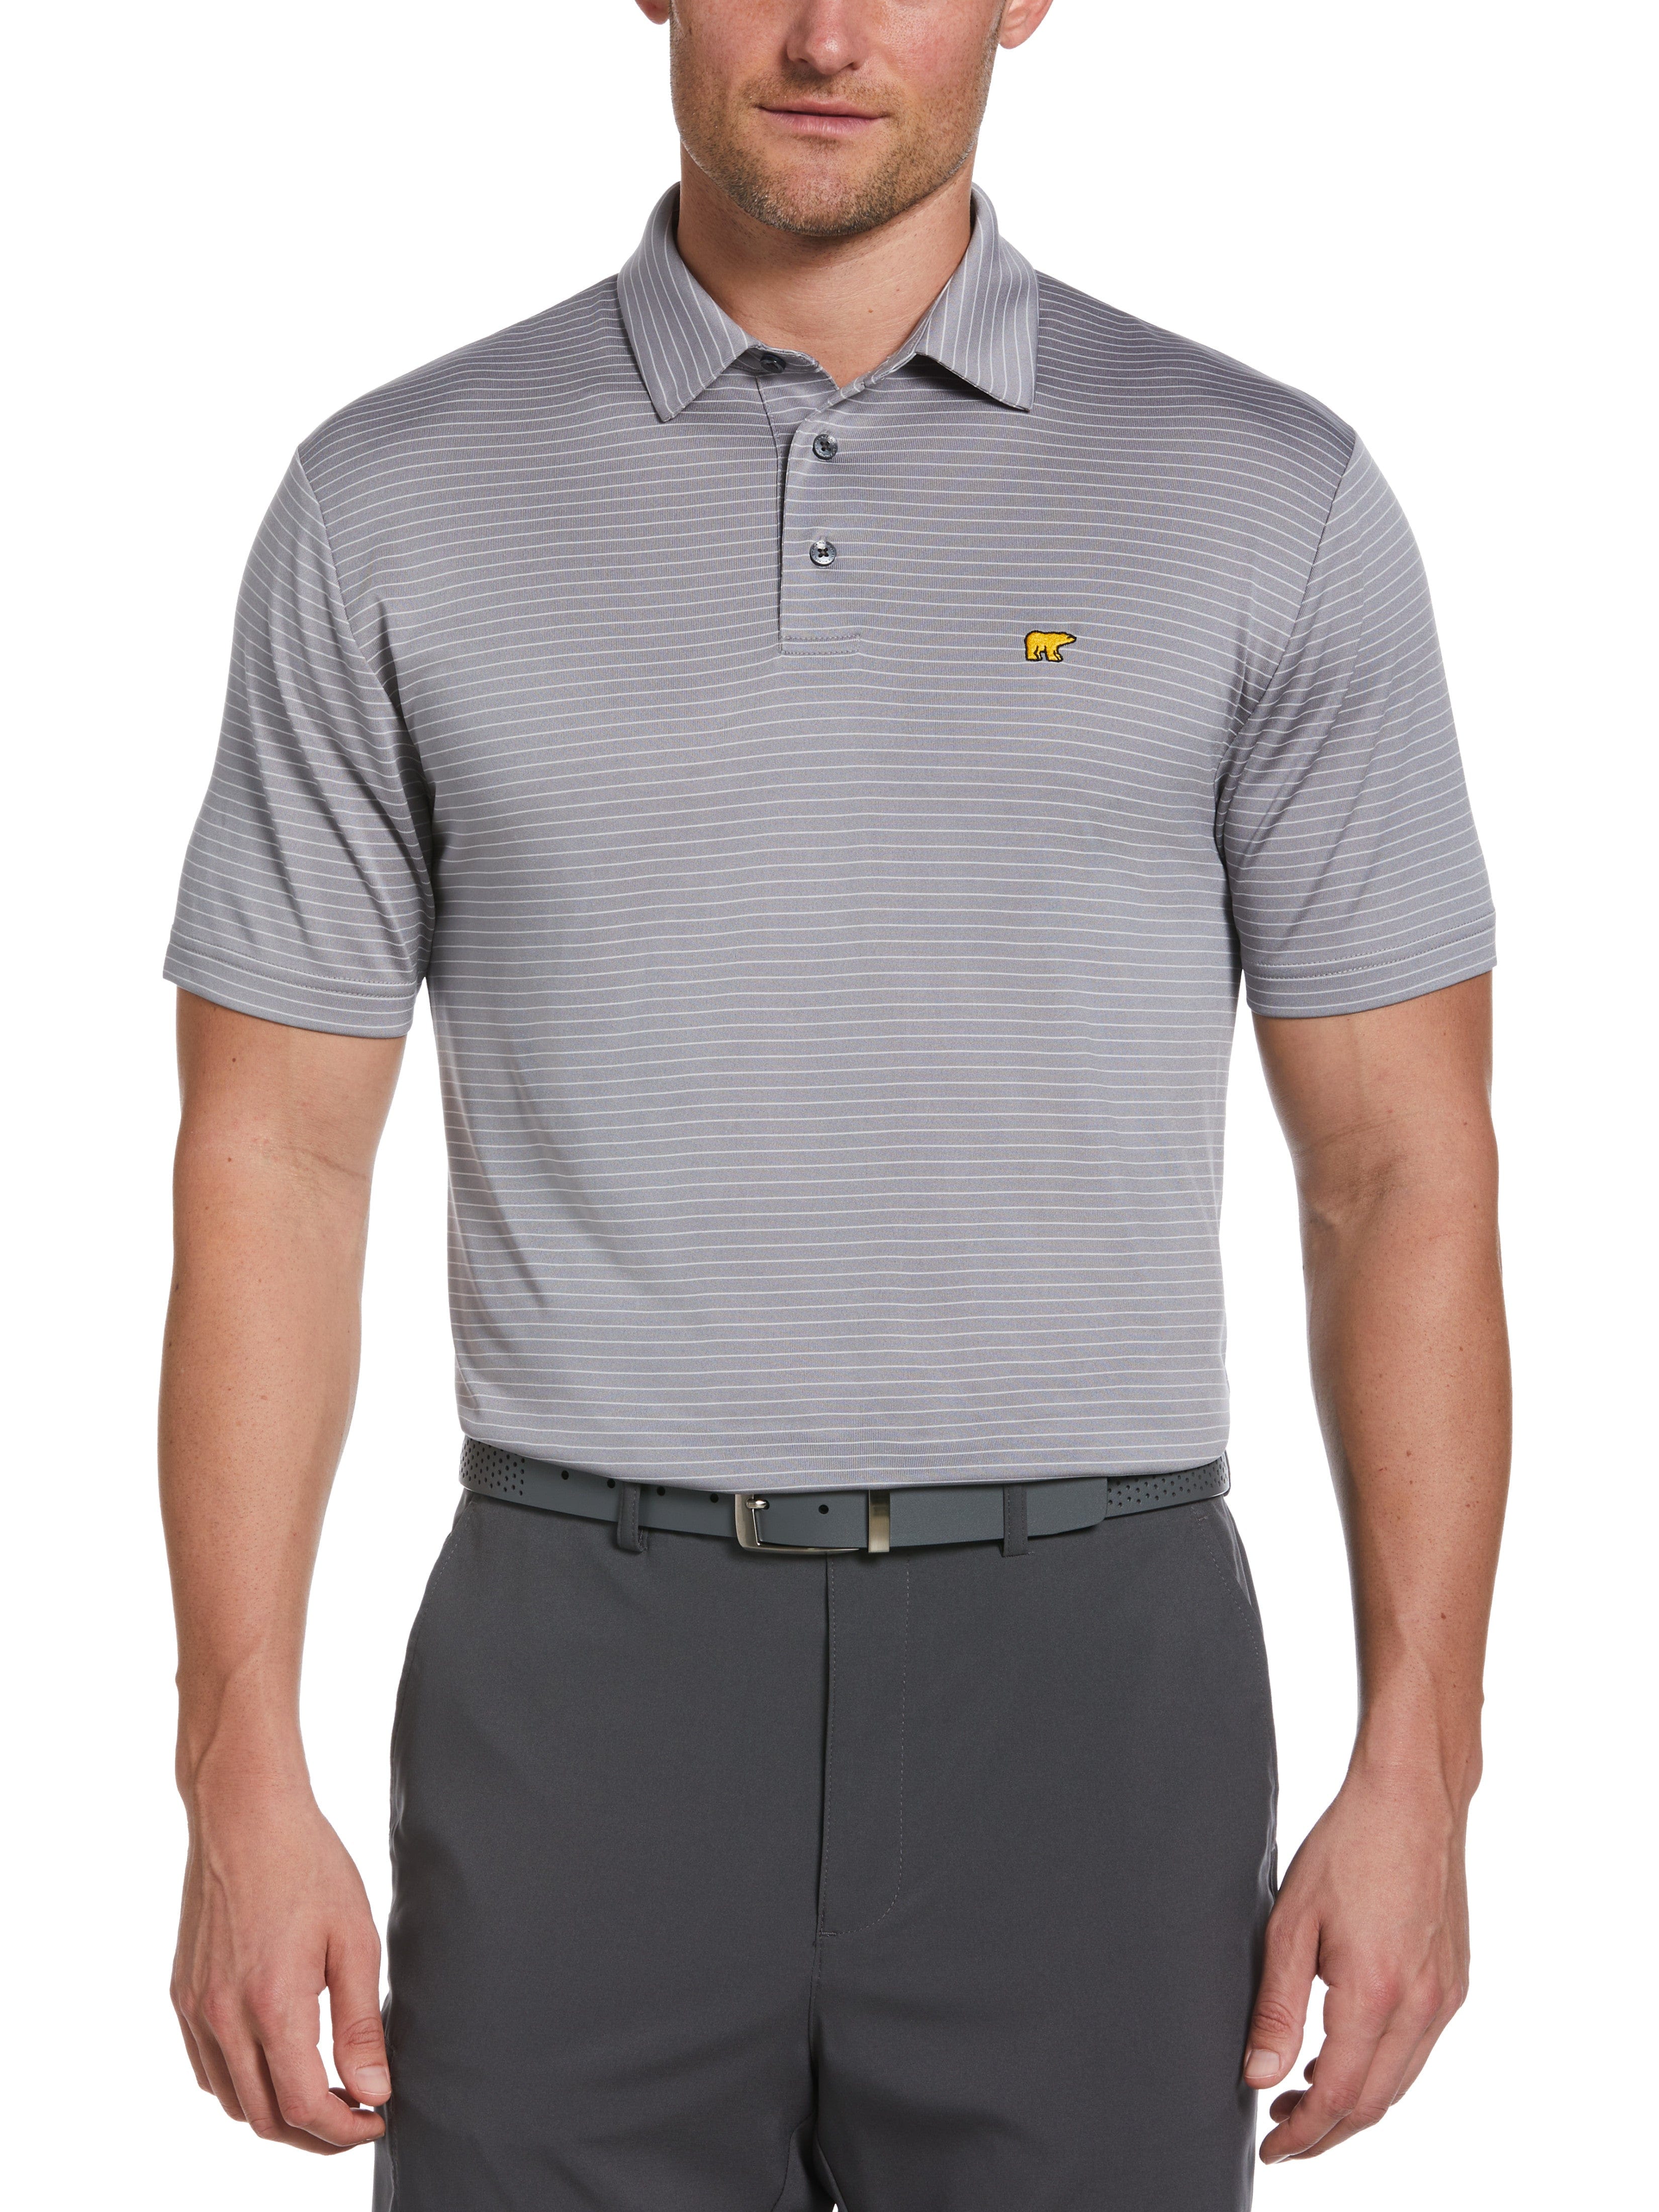 Jack Nicklaus Mens Two Color Stripe Golf Polo Shirt, Size 3XL, Tradewinds Gray, 100% Polyester | Golf Apparel Shop